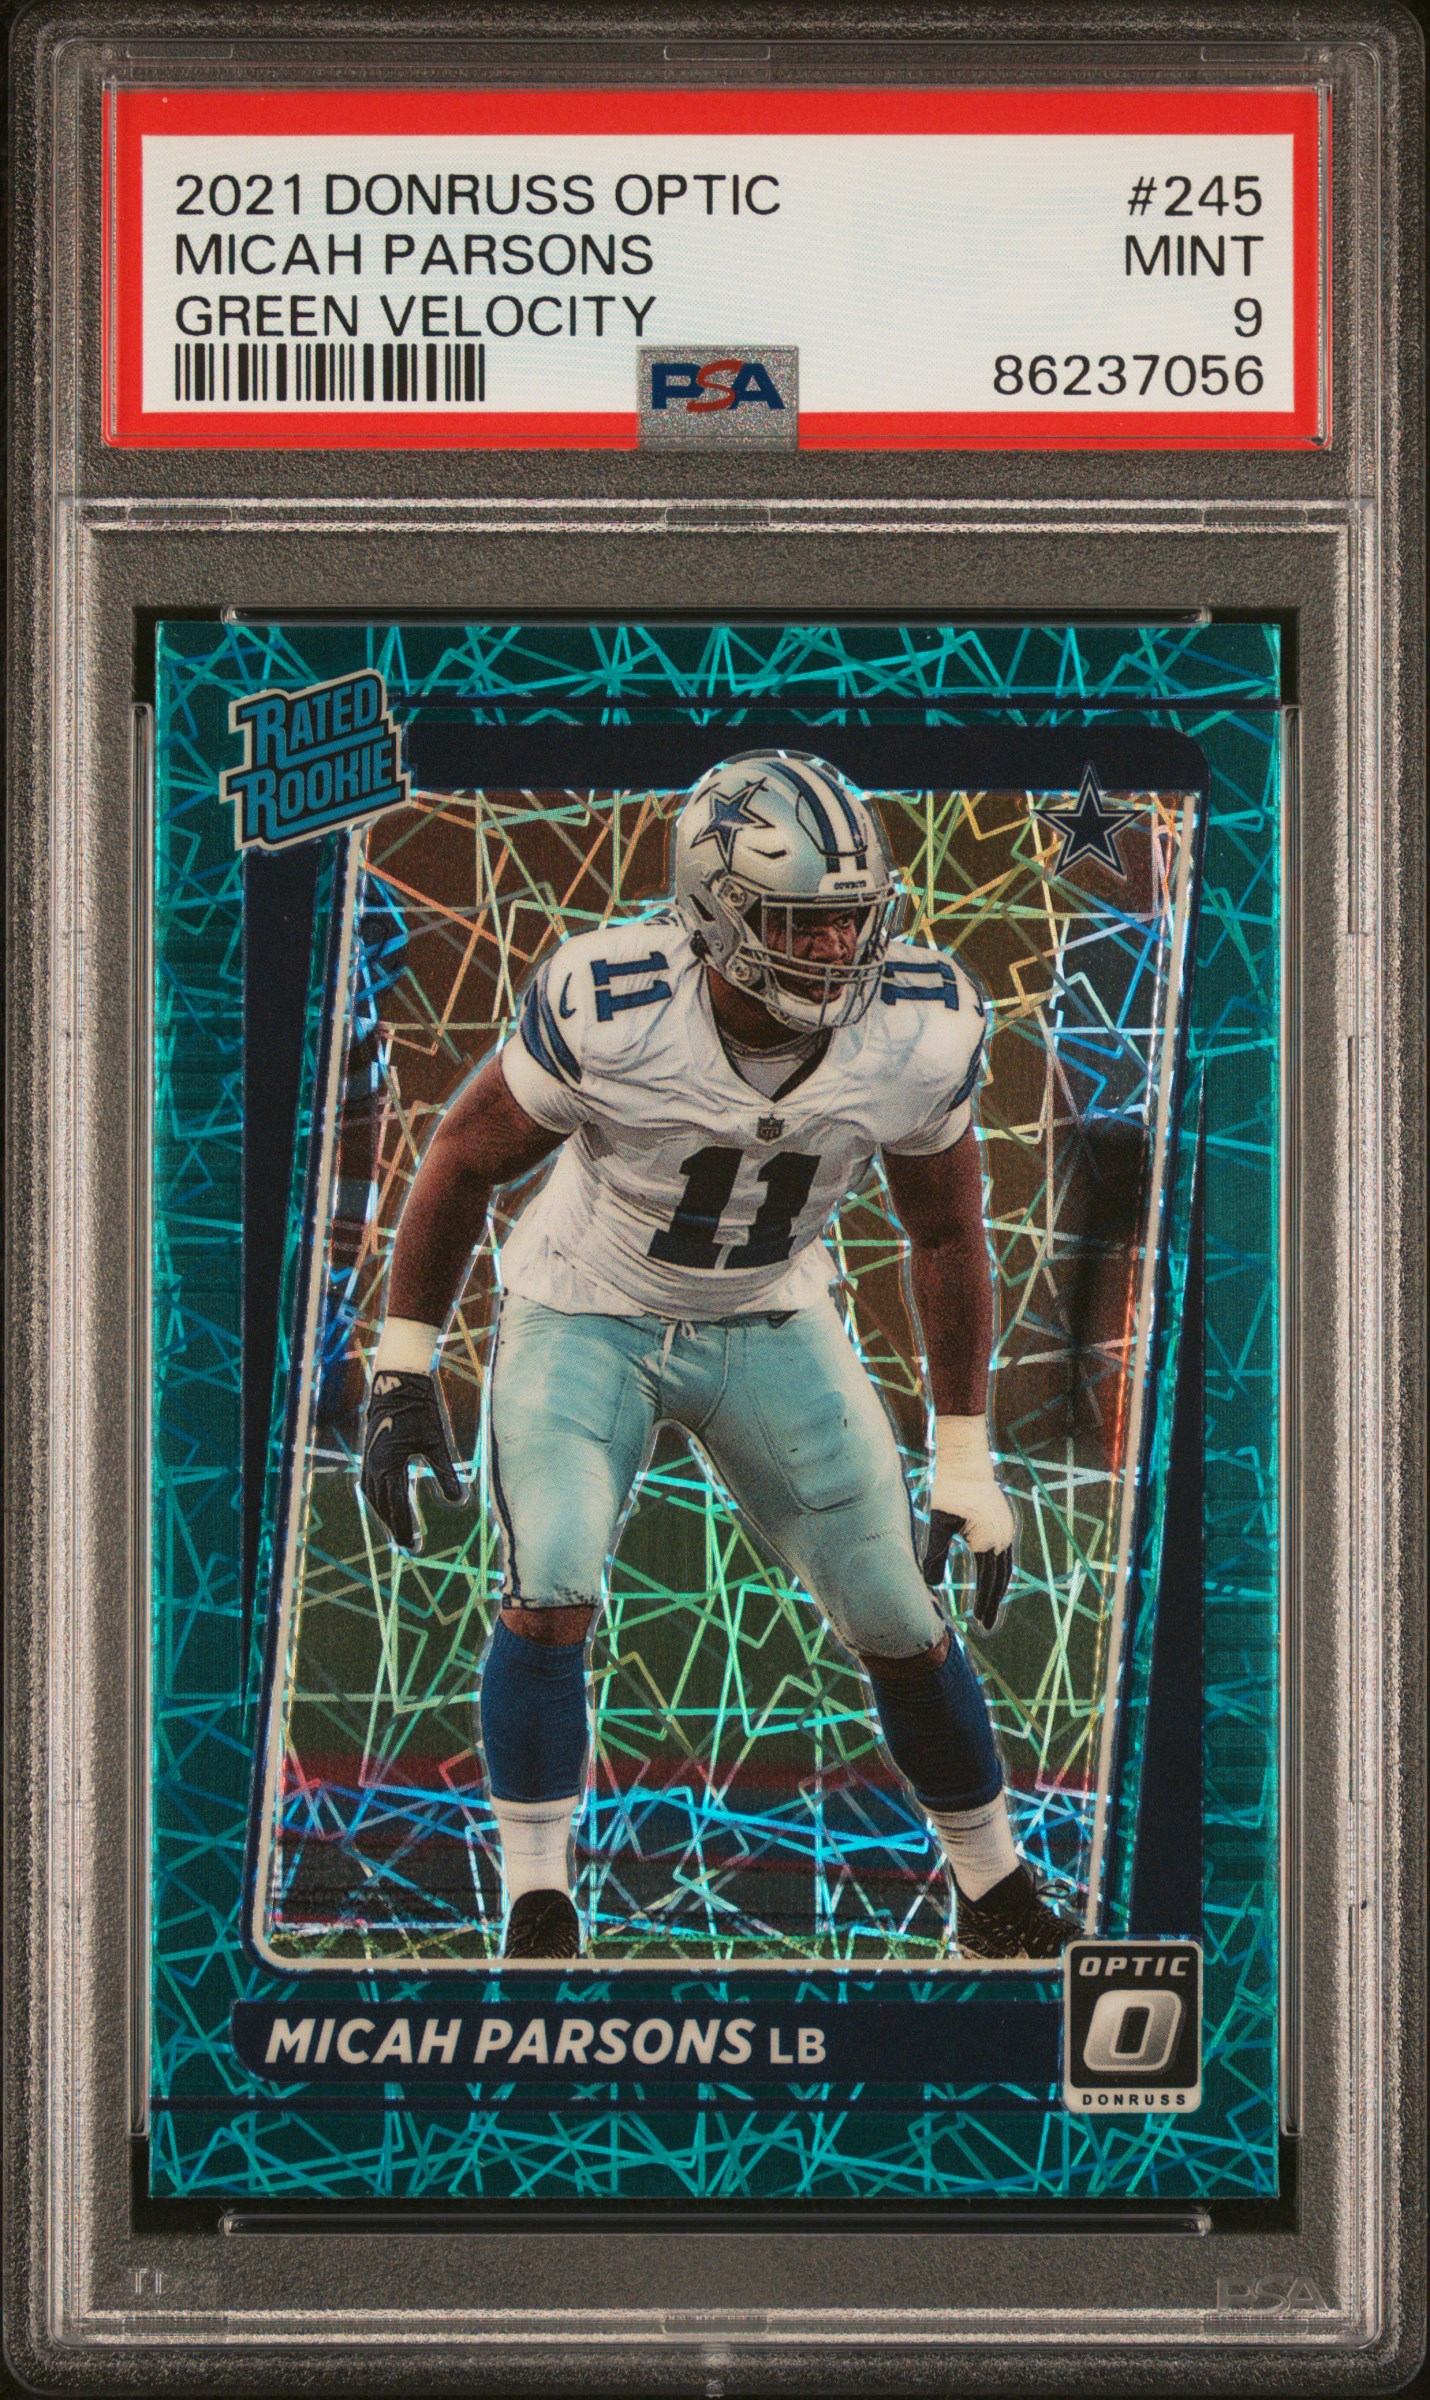 2021 Panini Donruss Optic Green Velocity Rated Rookie #245 Micah Parsons Rookie Card – PSA MINT 9